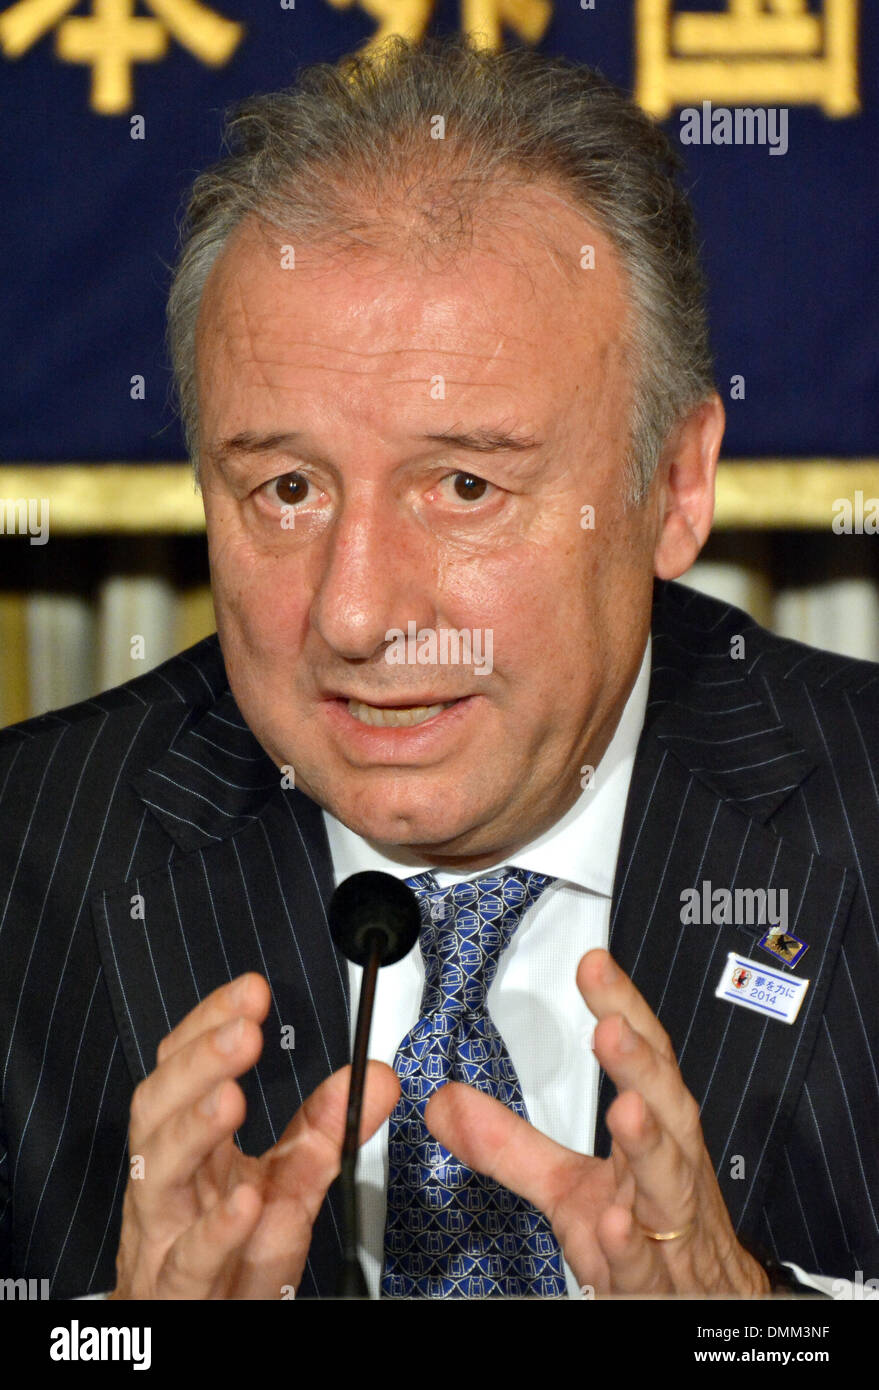 Tokyo, Japan. 16th Dec, 2013. Alberto Zaccheroni, the Italian head coach of japan's national football team, speaks before the foreign and domestic media during a news conference at Tokyo's Foreign Correspondents' Club of Japan on Monday, December 16, 2013. Zaccheroni and his 11 in the Samurai Blue will meet Ivory Coast, Colombia and Greece in the 2014 FIFA World Cup elimination round slated for June in Brazil. Credit:  Natsuki Sakai/AFLO/Alamy Live News Stock Photo